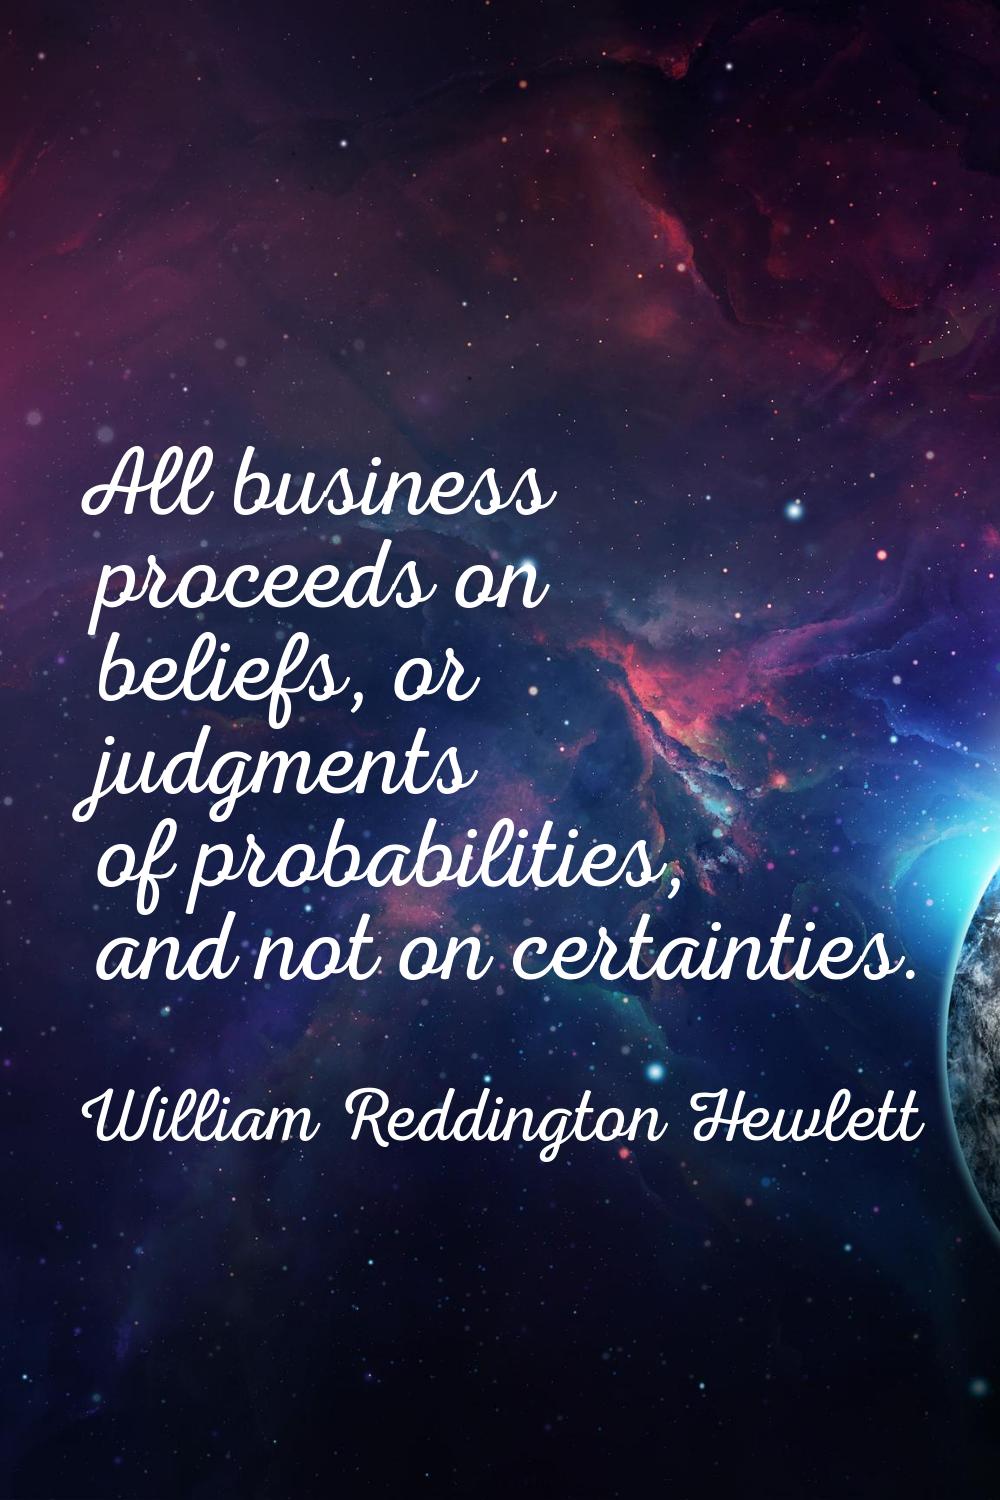 All business proceeds on beliefs, or judgments of probabilities, and not on certainties.